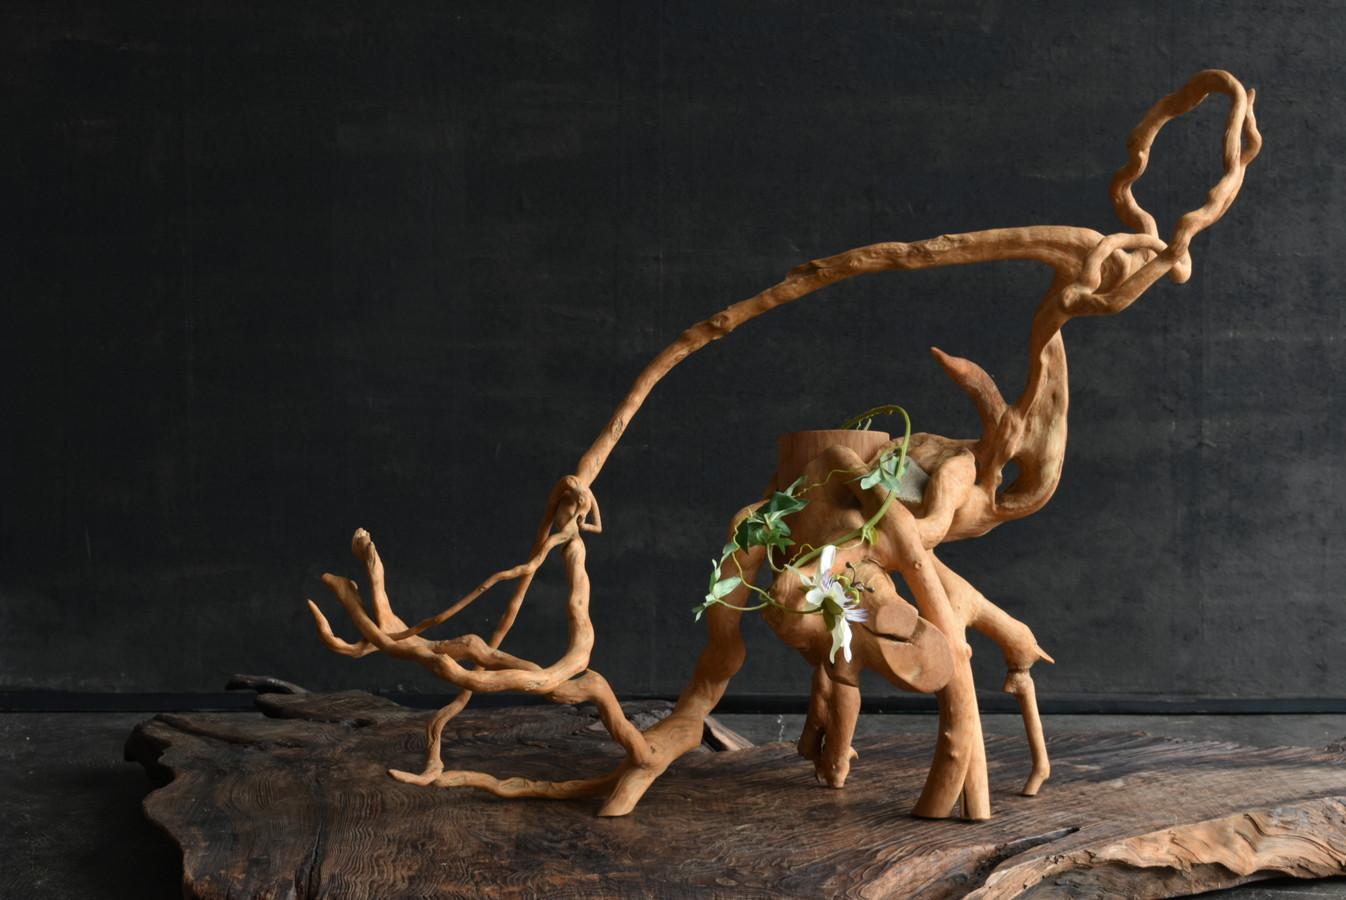 This is a flower vase made from the roots of an old Japanese tree.
Since ancient times in Japan and China, objects, display stands, and flower vases have been made using tree roots like this.
Many of these objects have very unique shapes.
I feel